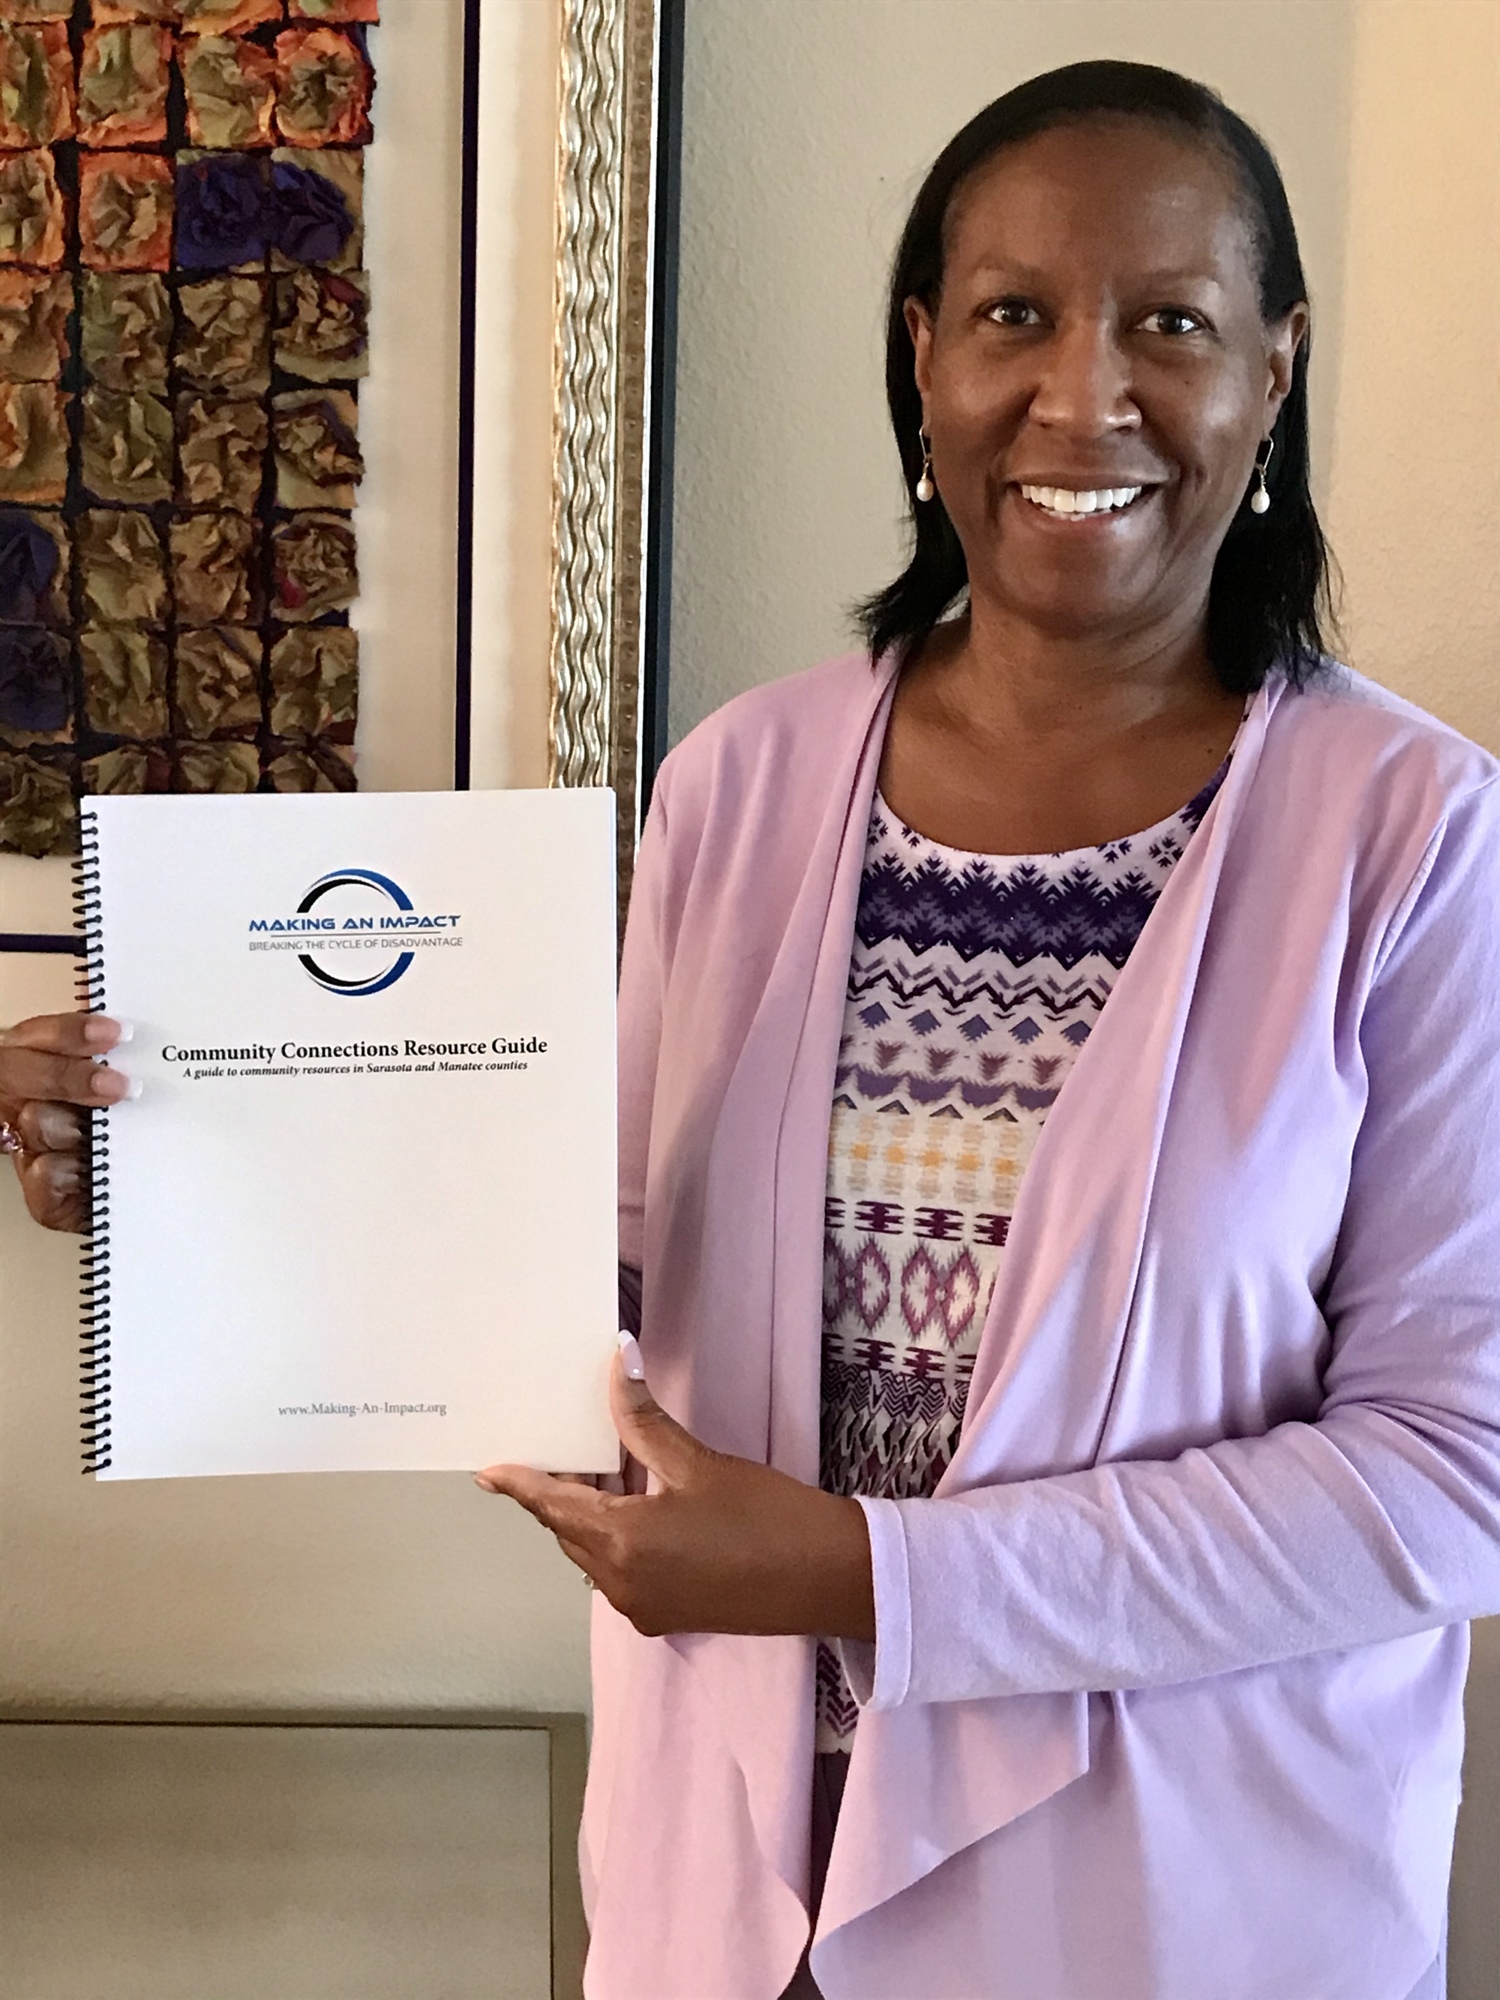 Making an Impact board chair and registered nurse Victoria Kasdan holds the Community Connections Resource Guide, includes background and contact information on over 200 local agencies organized into 17 categories of service.